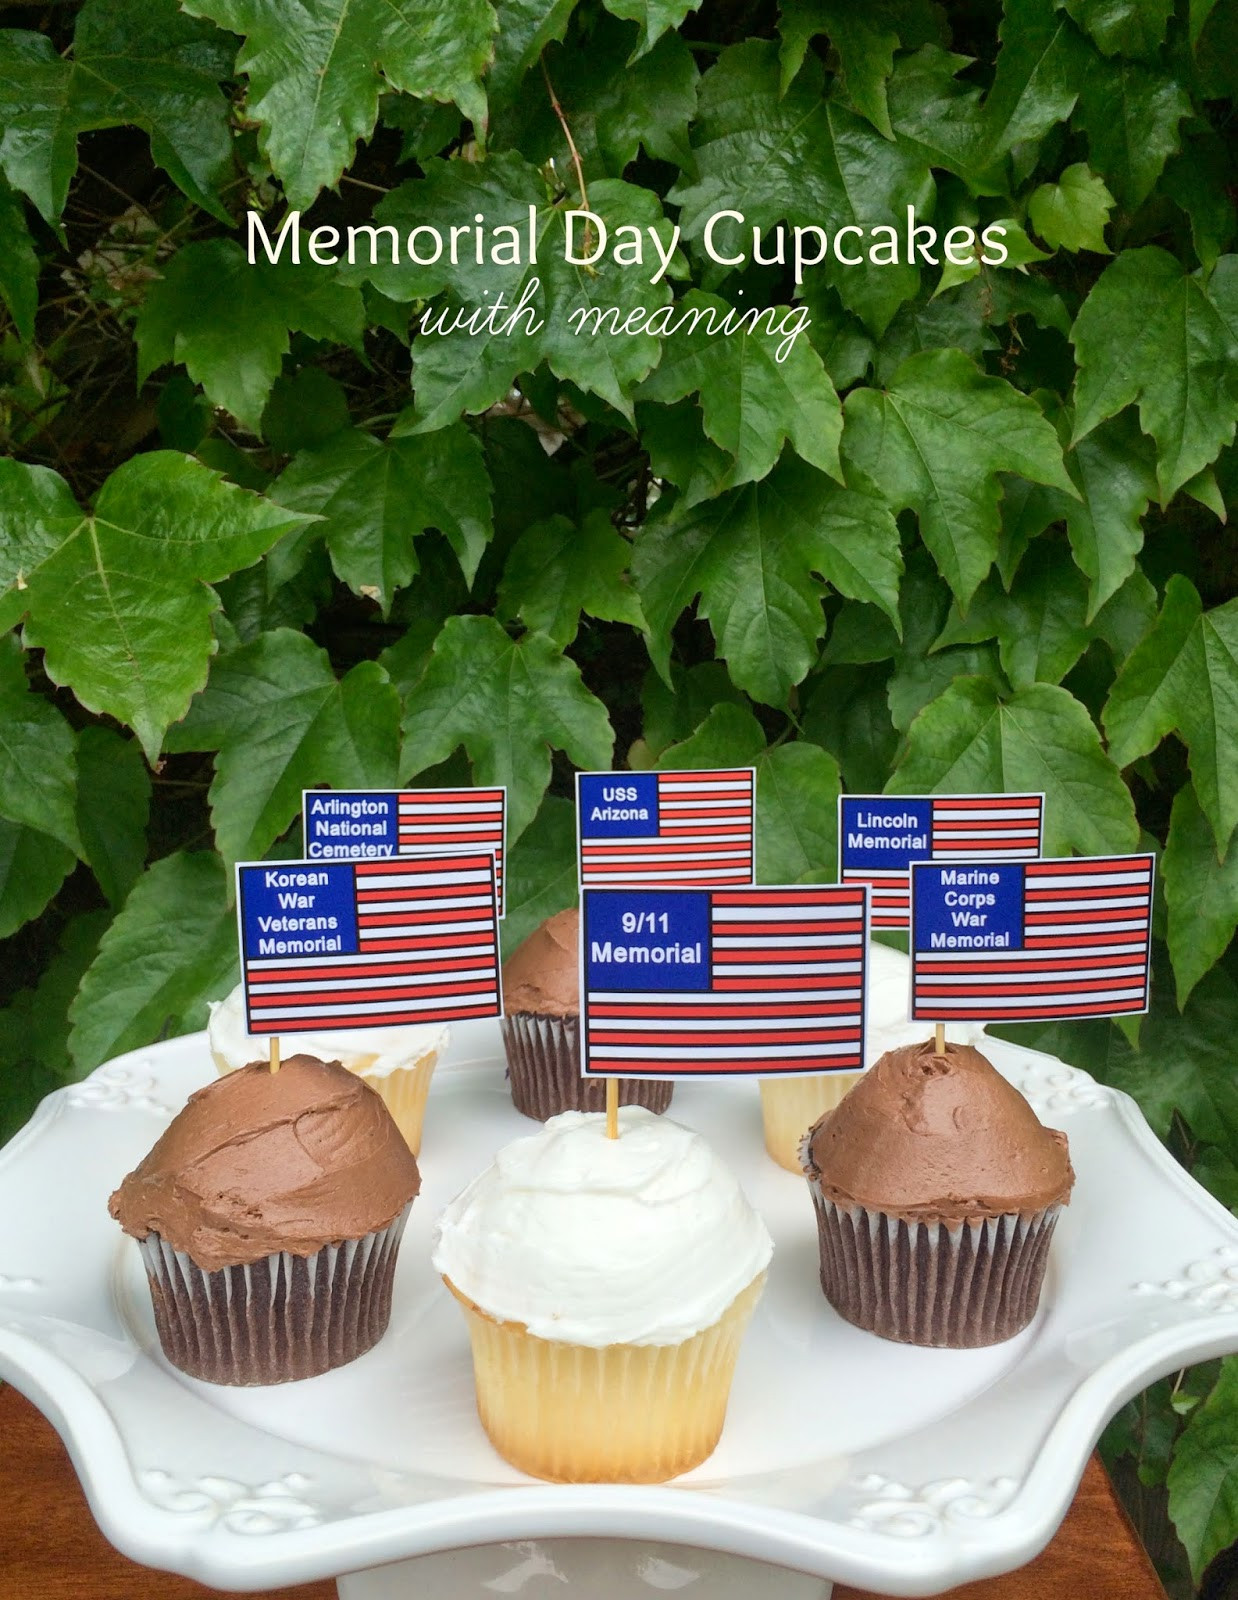 Memorial Day Cupcake Ideas
 Jac o lyn Murphy Memorial Day Cupcakes with meaning